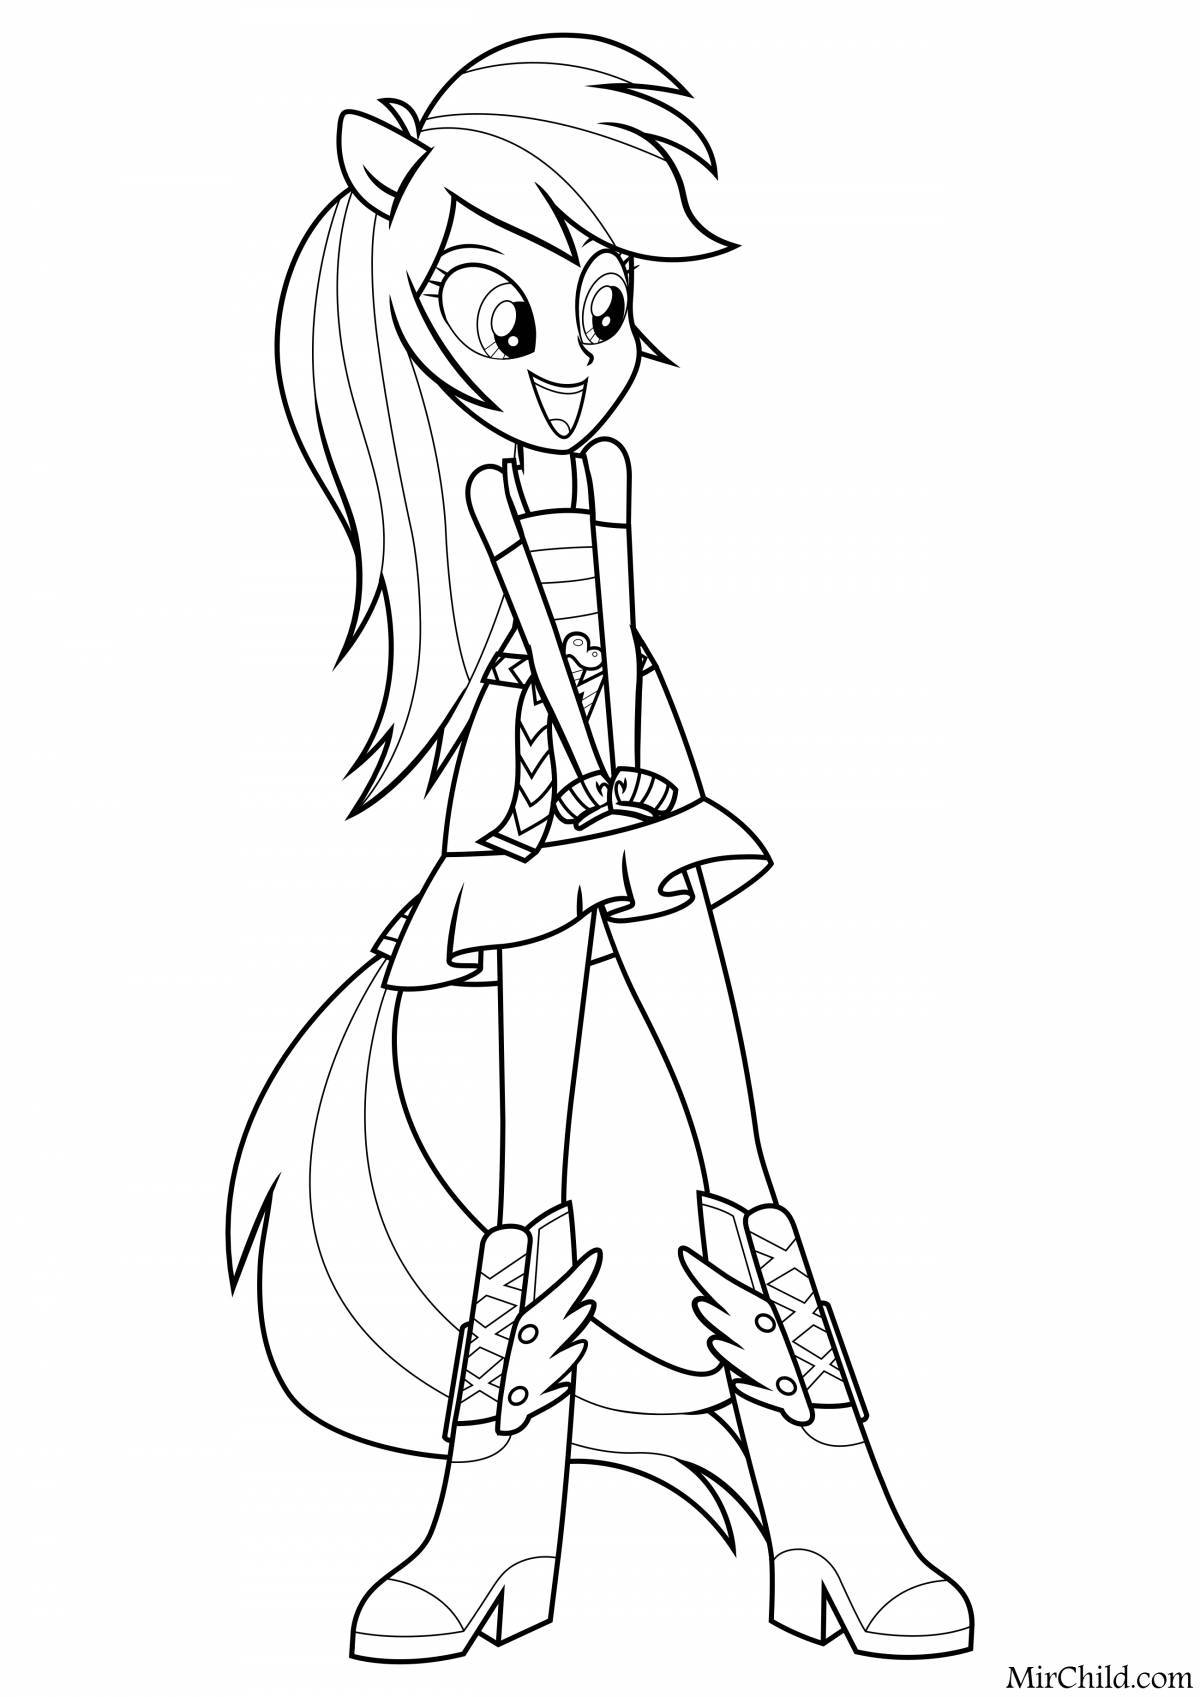 Coloring page dazzling equestria girls